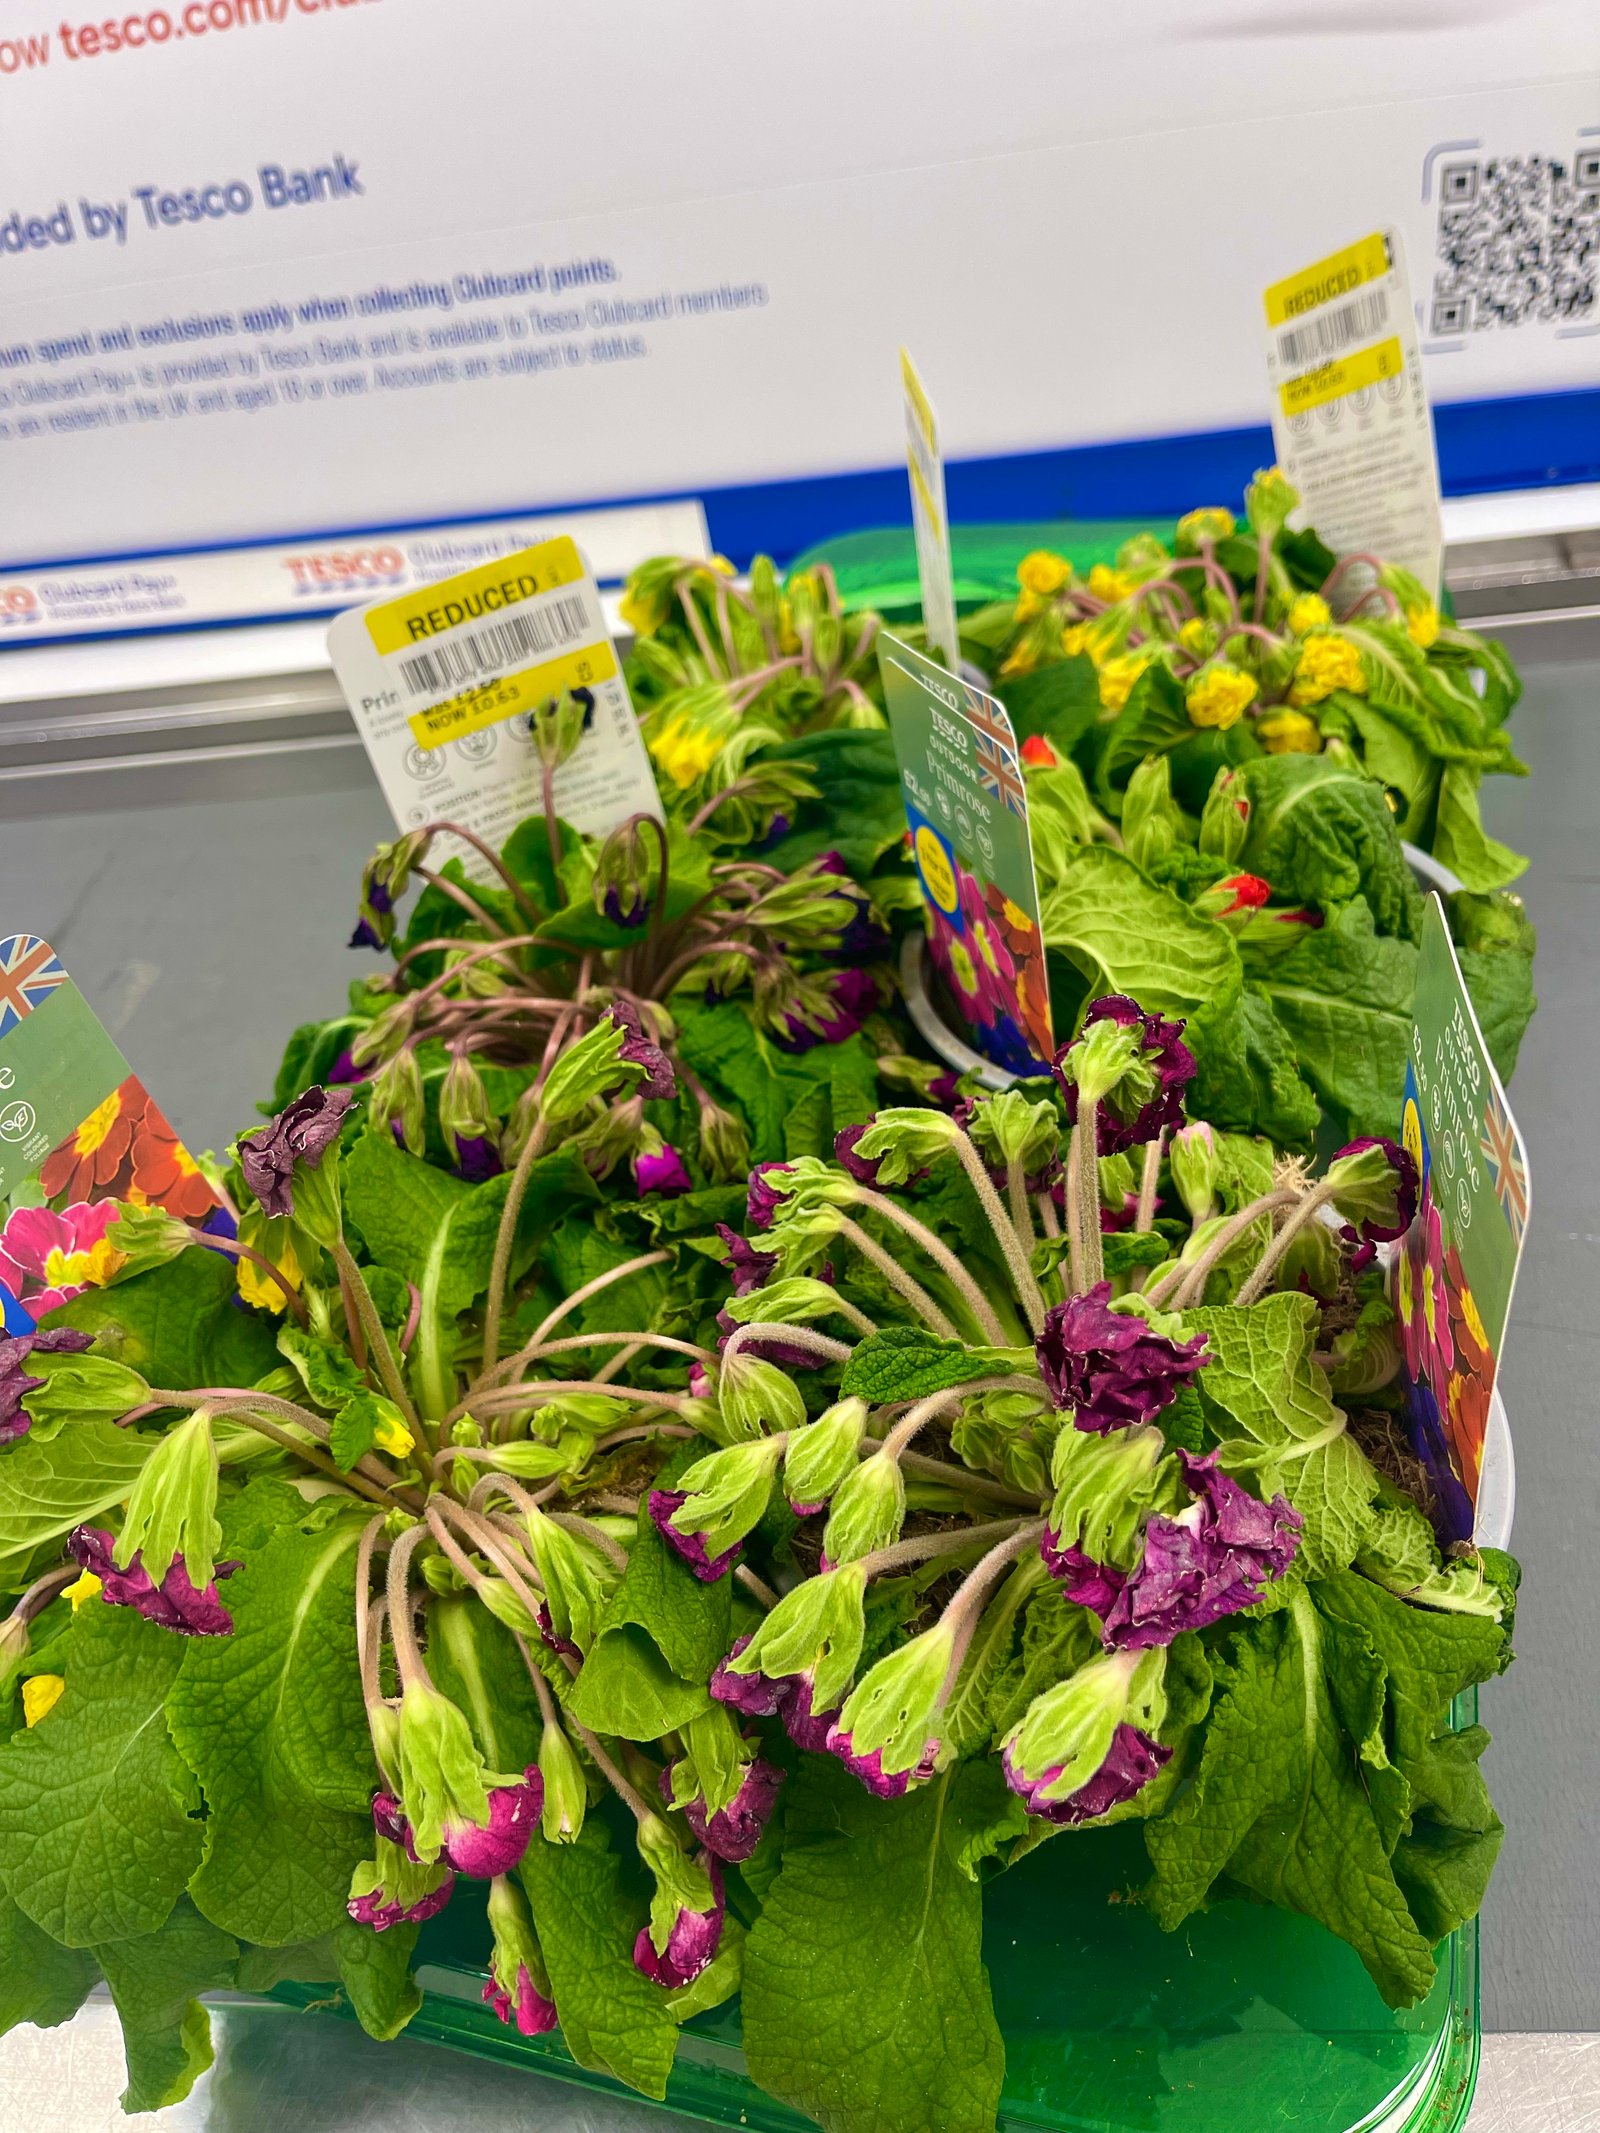 The dying primrose plants Lei Hang picked up from Tesco in Lewisham